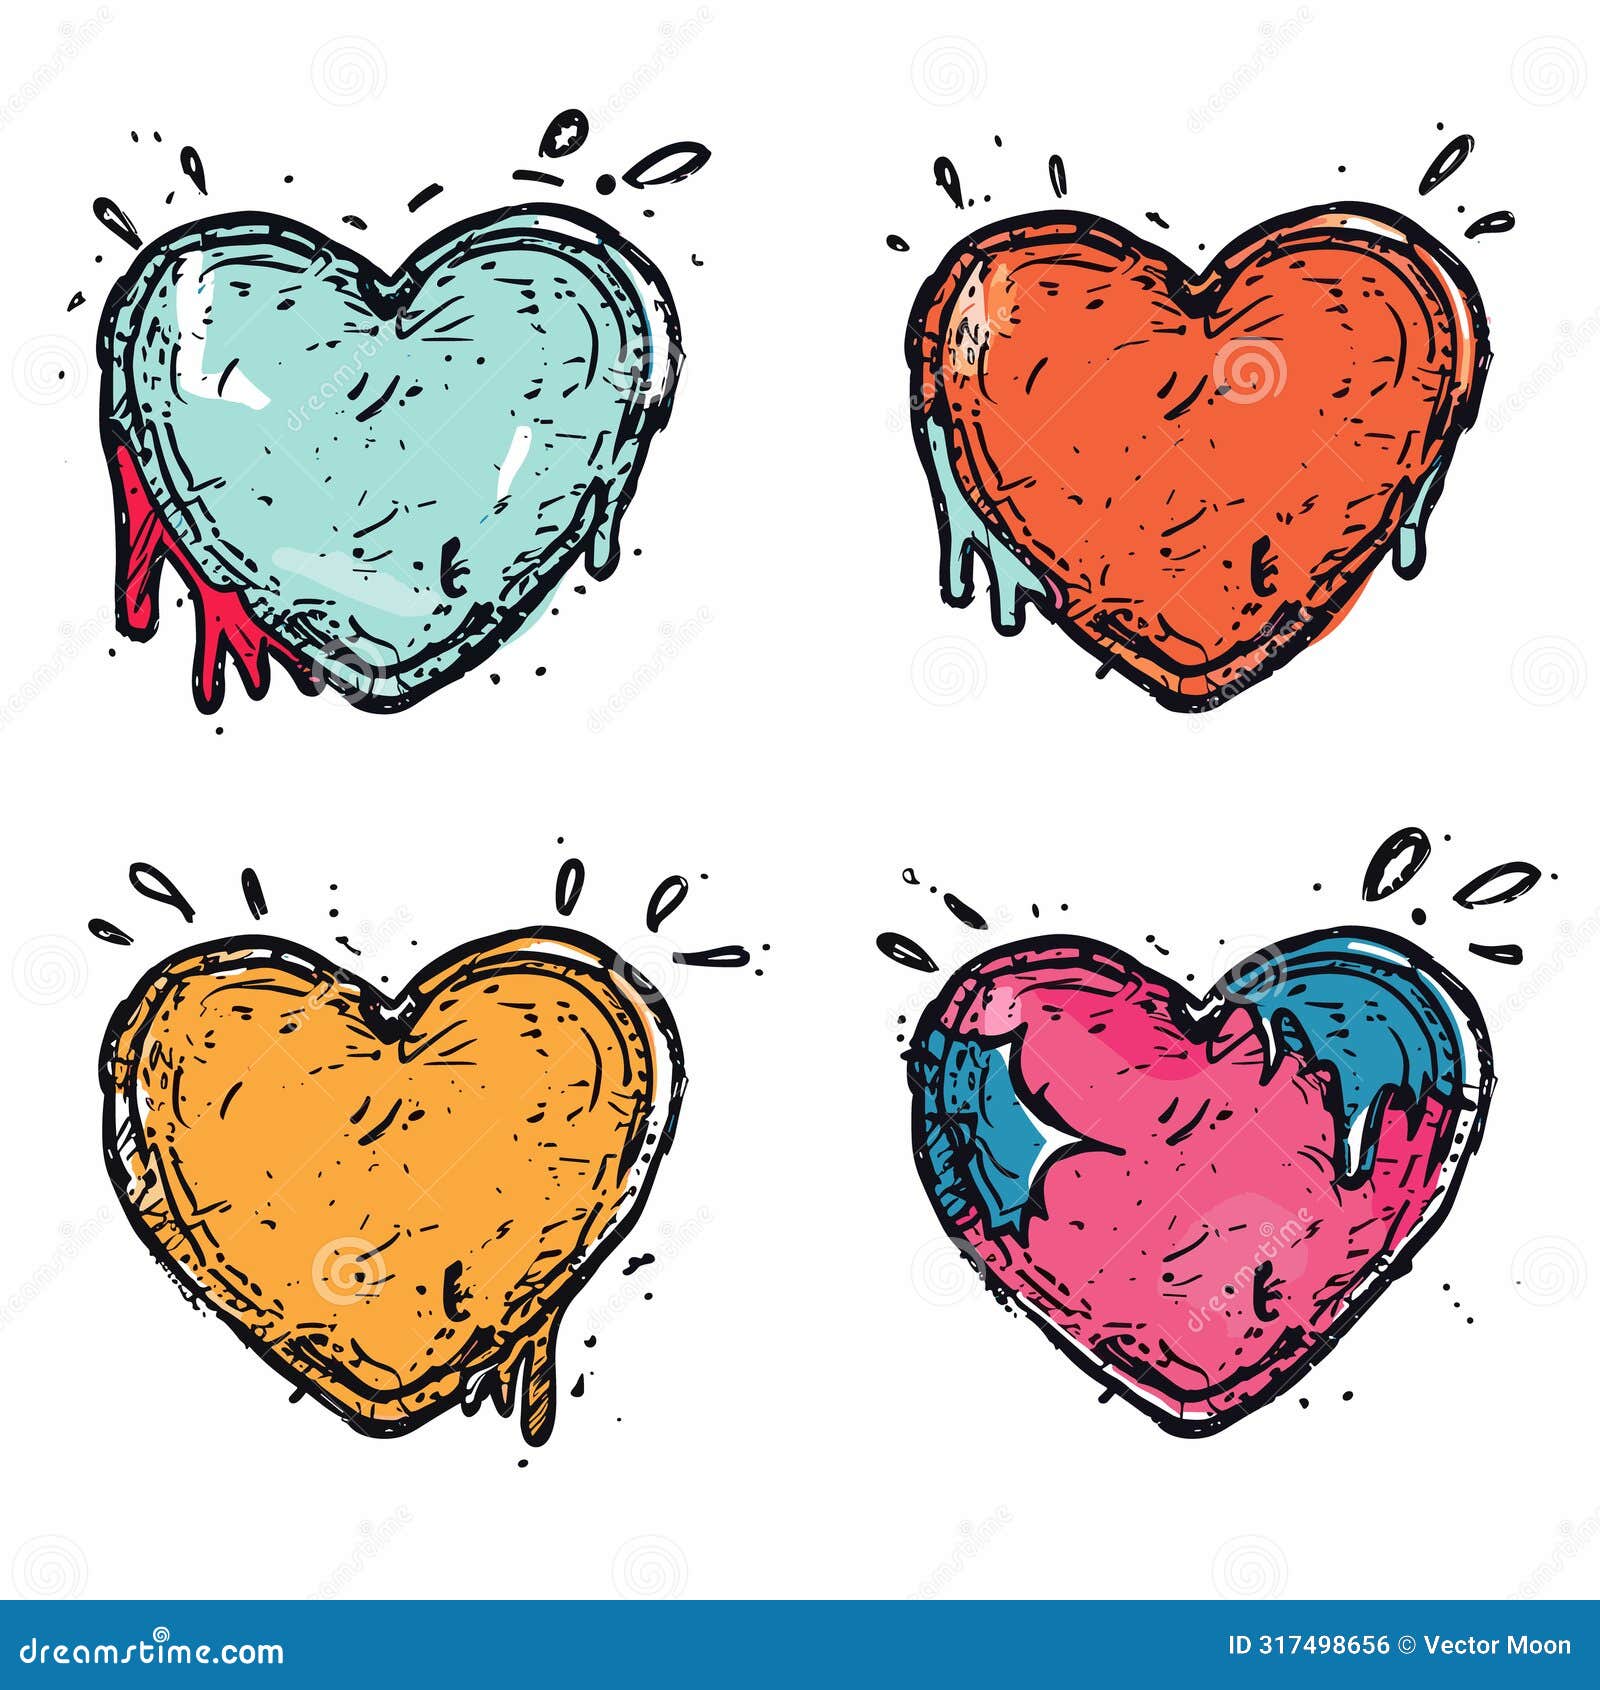 four colorful dripping hearts handdrawn style, distinct blue, red, yellow, pink hues